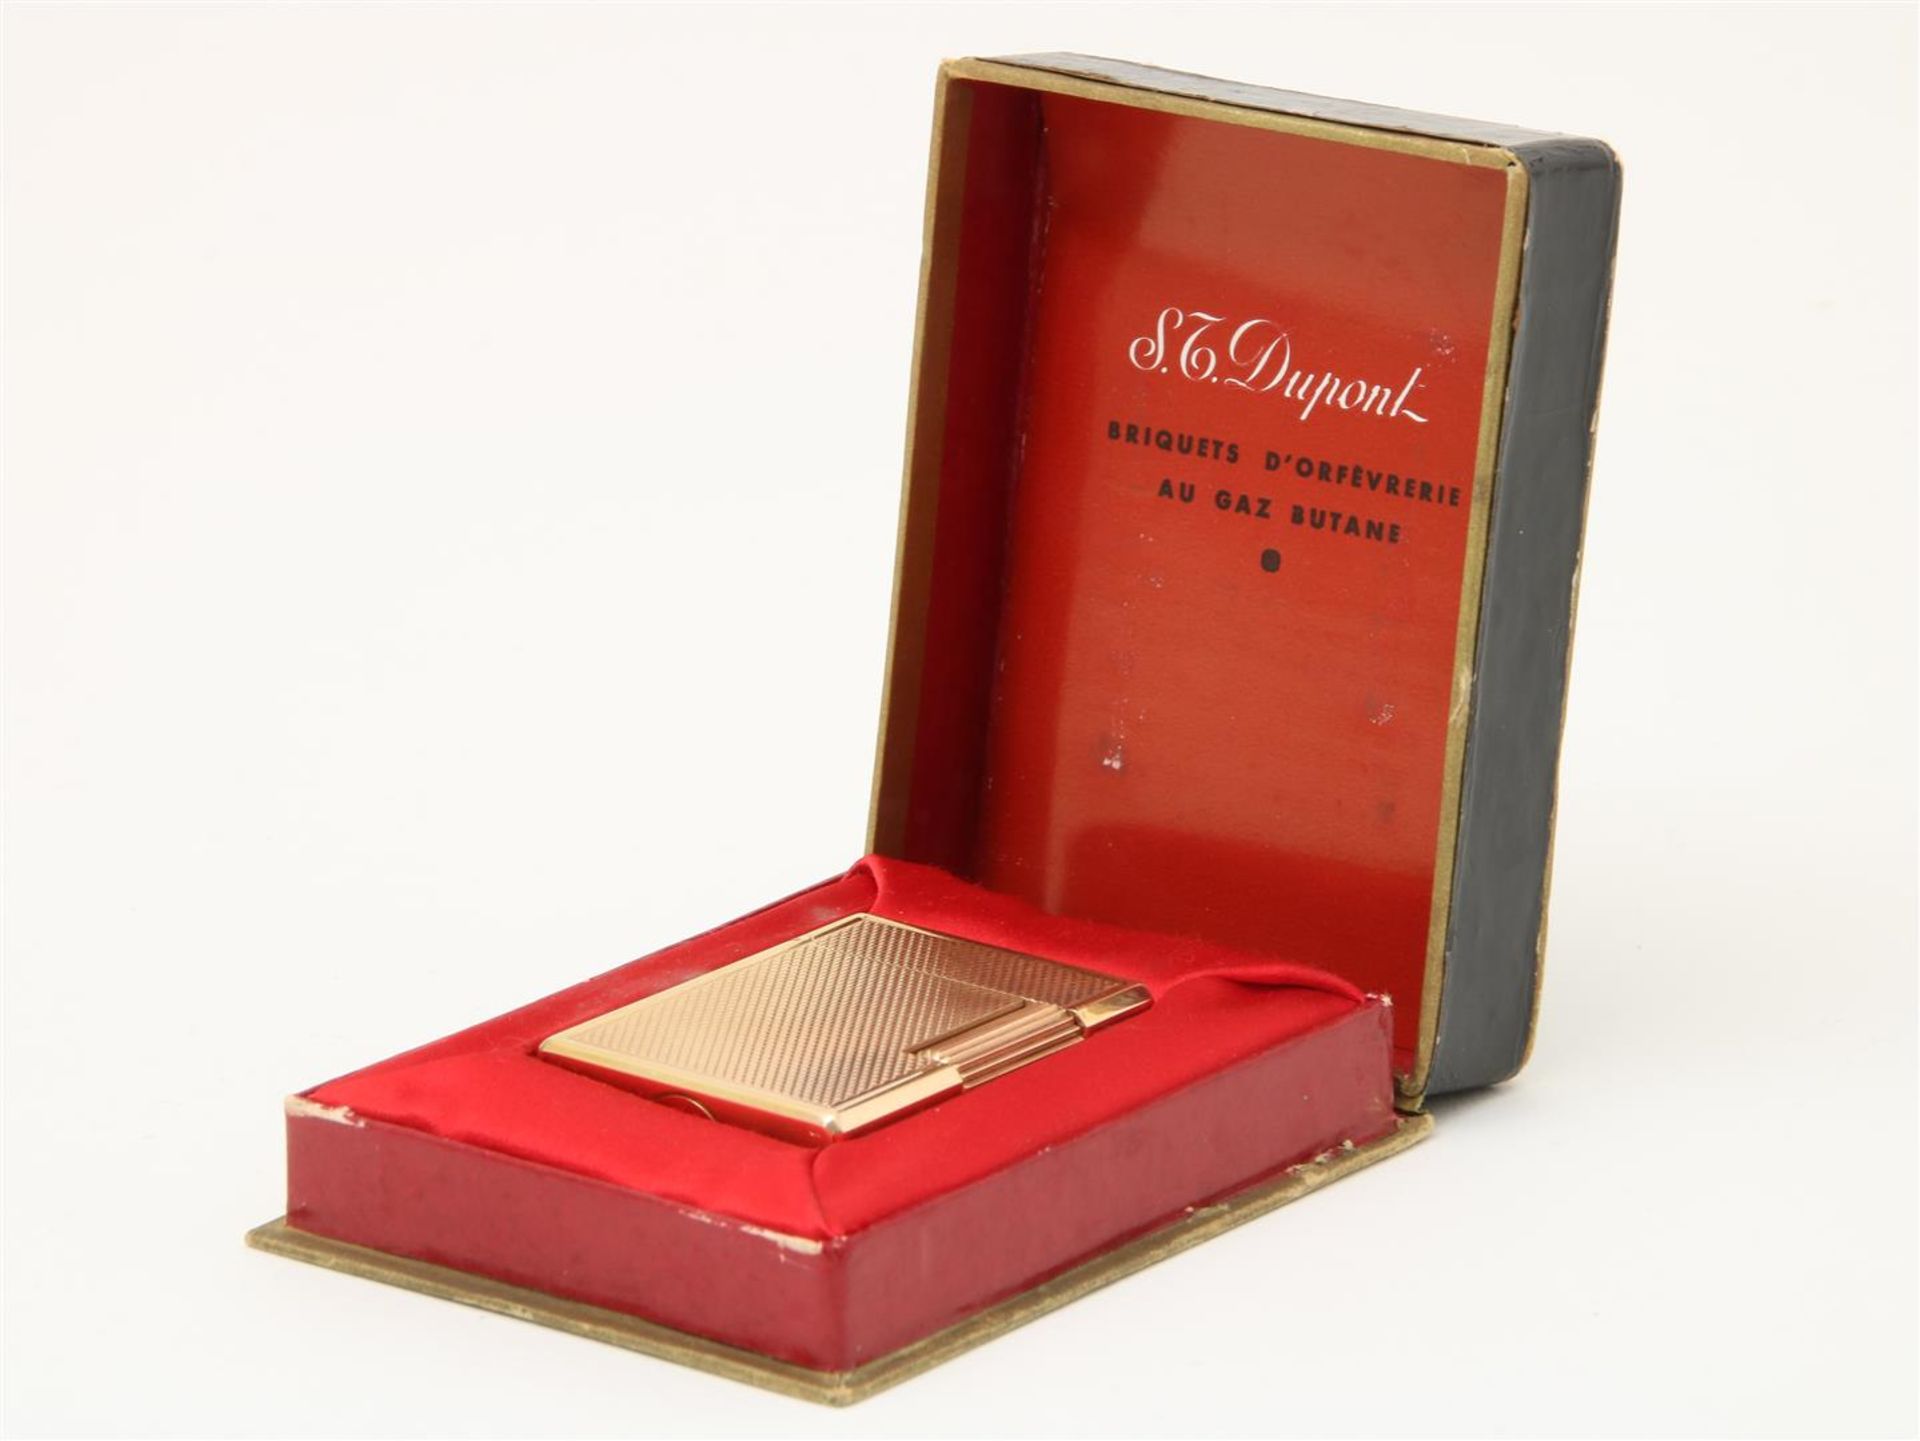 Gold-plated lighter, S.T. Dupont, in original box, numbered BG7361, height 4.8 cm. - Image 4 of 4